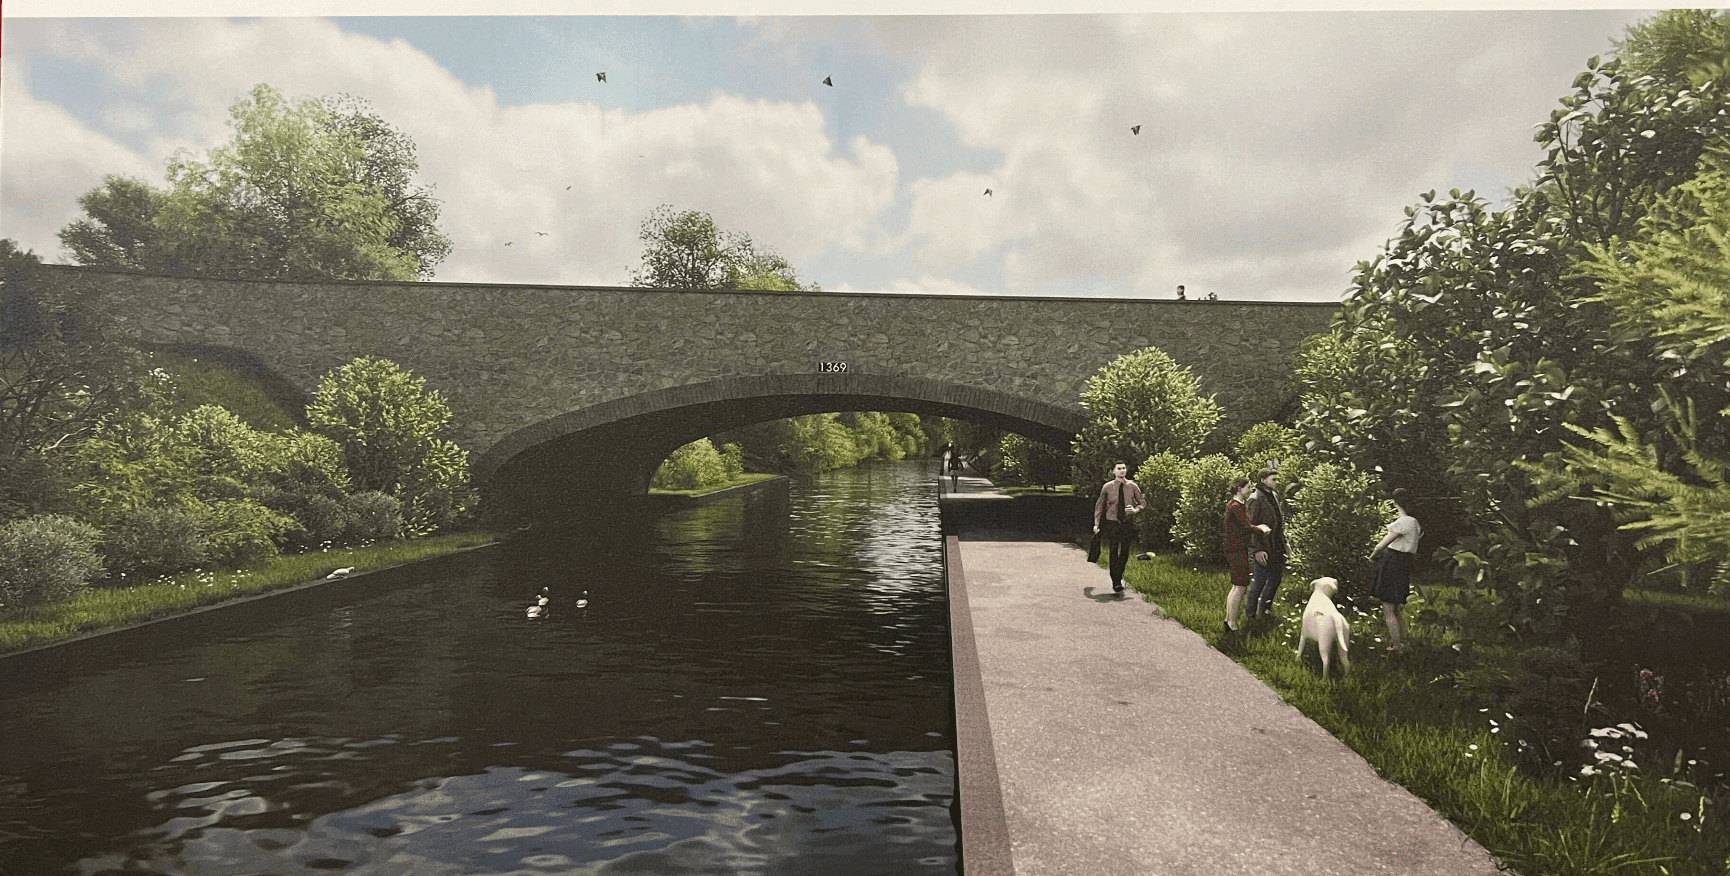 artist's impression of bridge over a canal